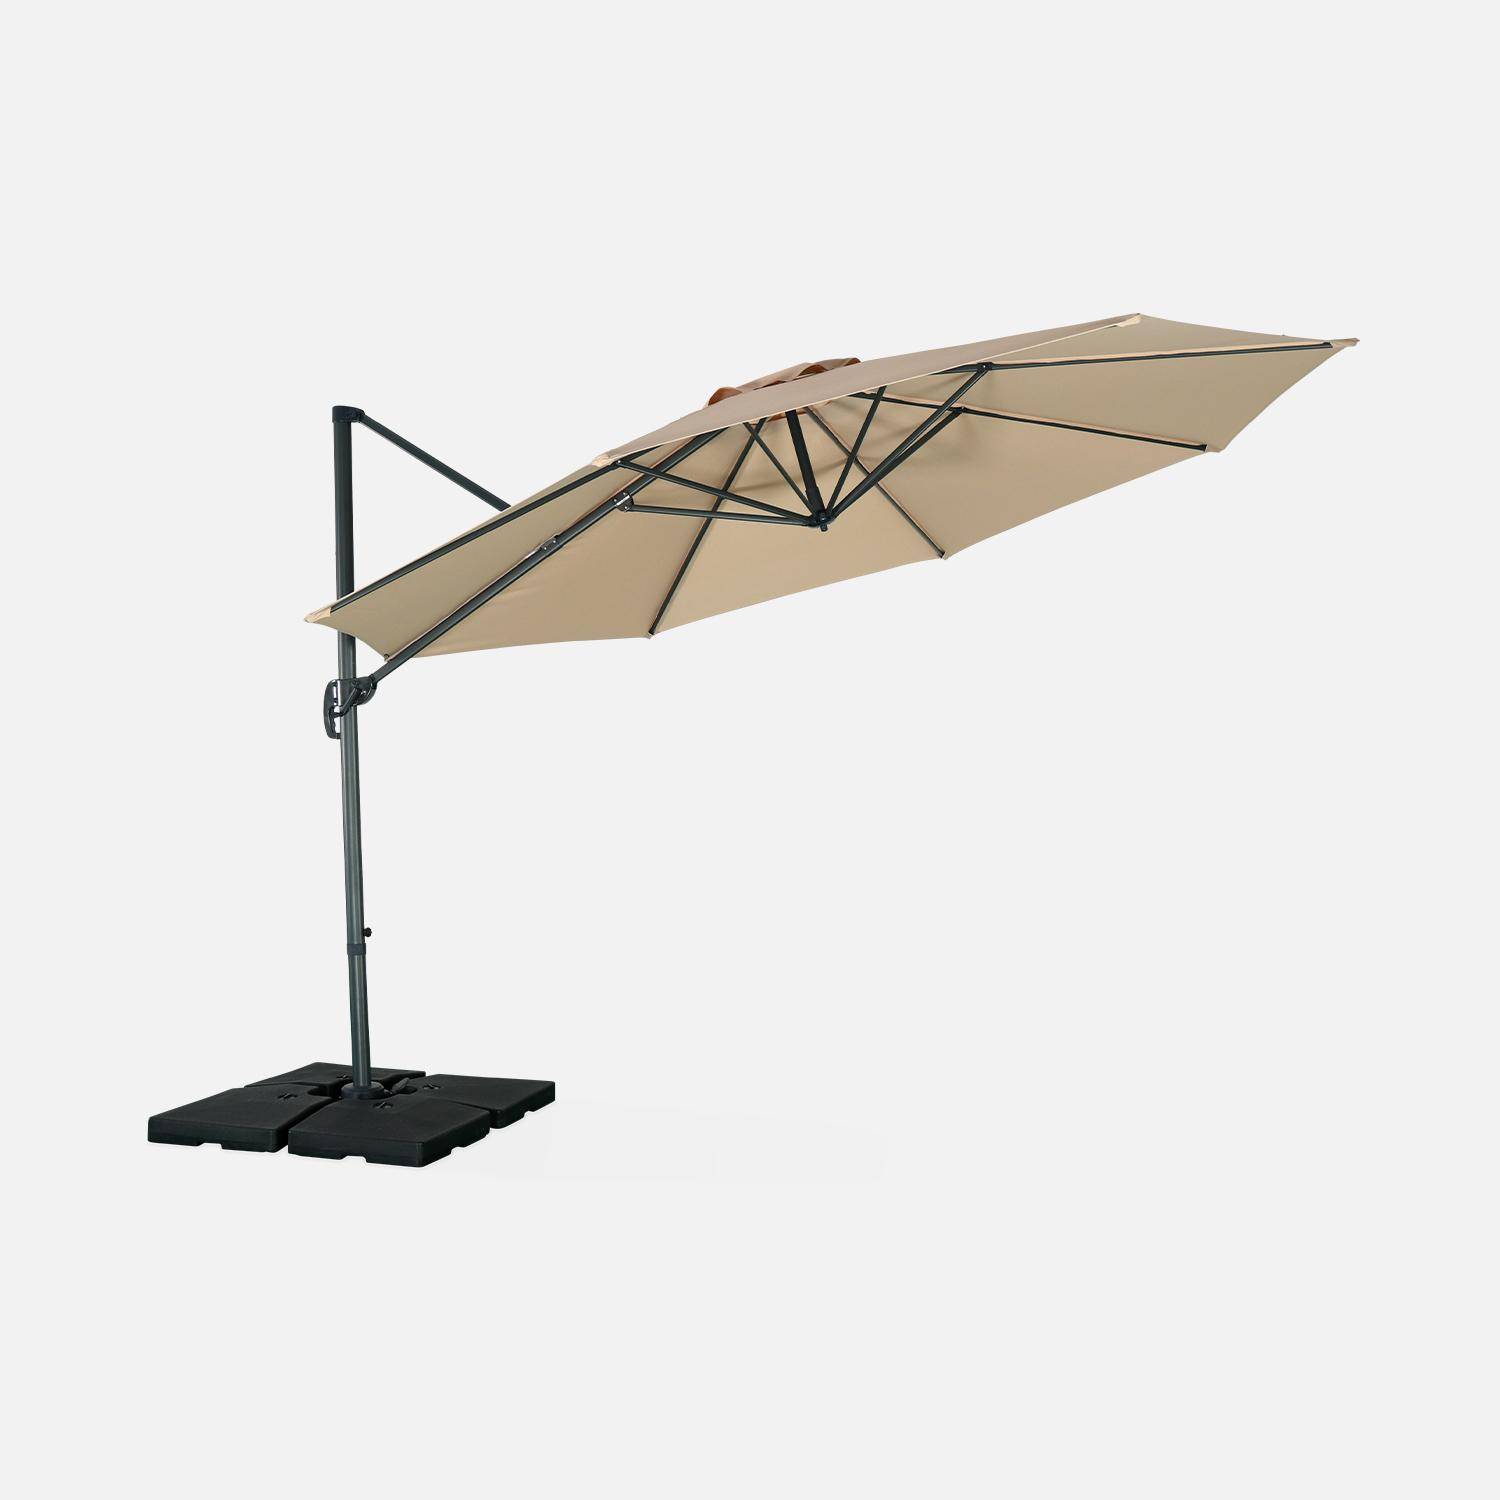 Parasol Ø350cm - parasol that can be tilted, folded and 360° rotation - Antibes - Beige Photo7